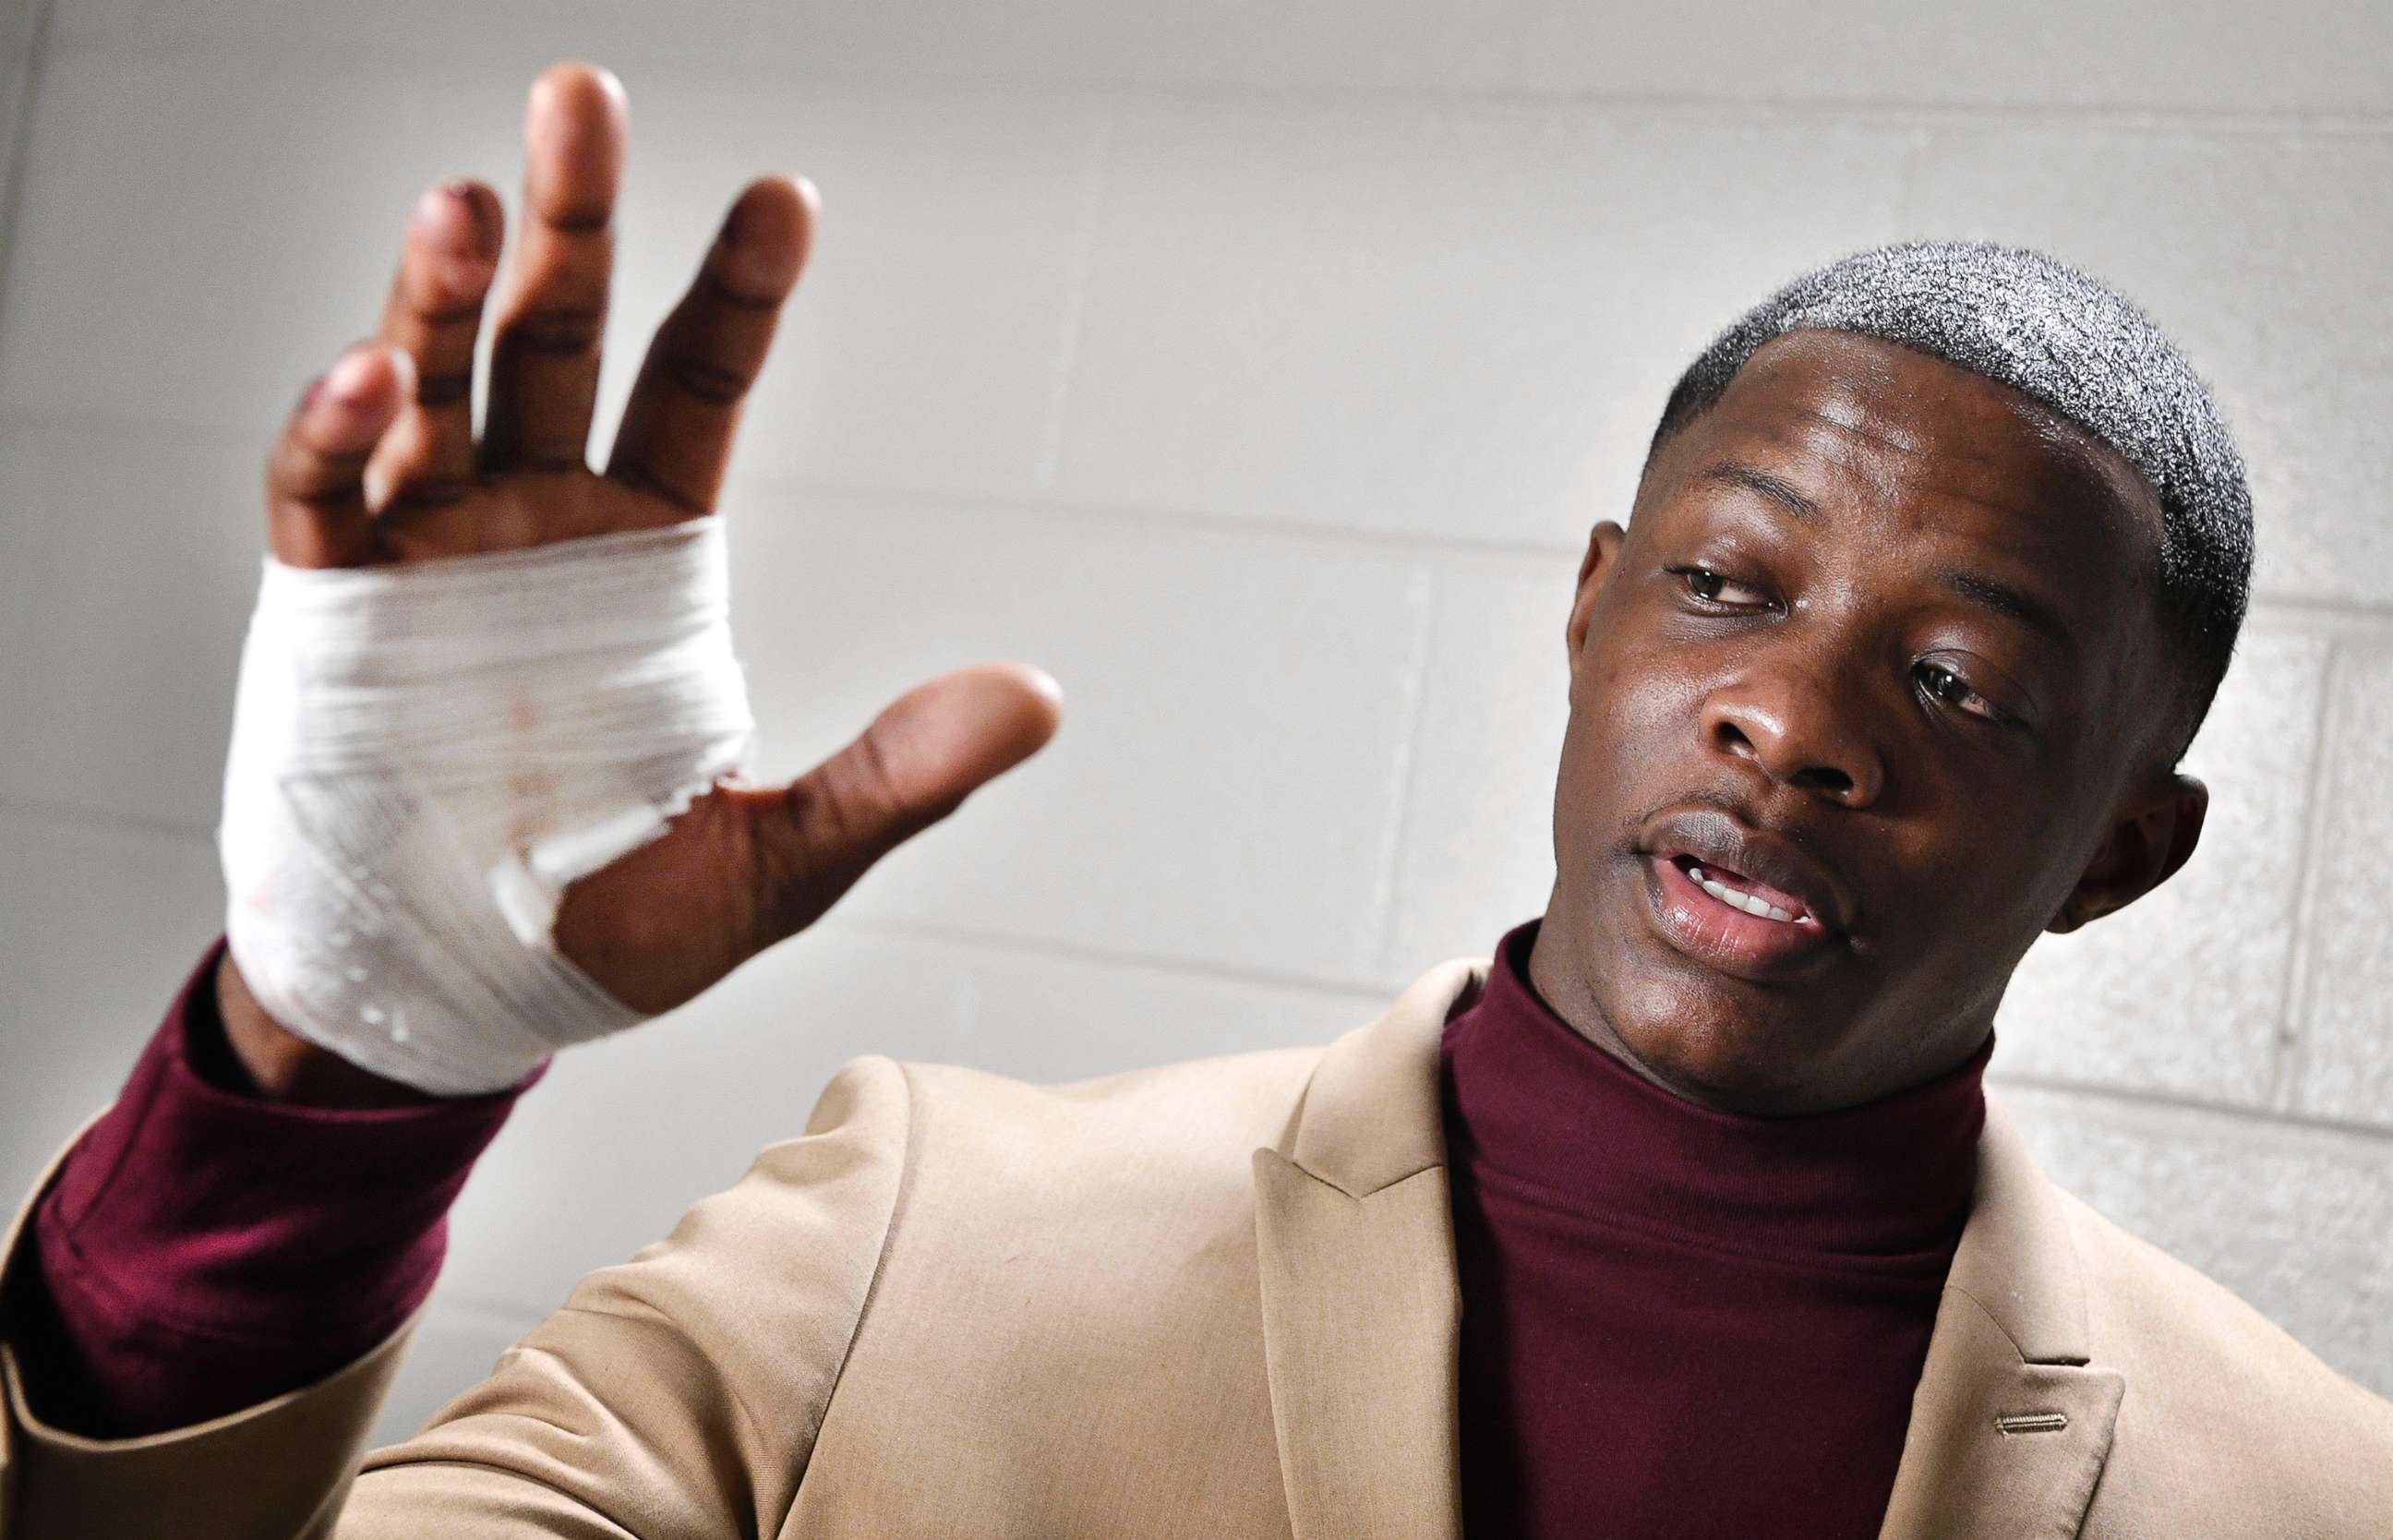 PHOTO: James Shaw Jr., 29, shows his hand that was injured when he disarmed a shooter inside an Antioch Waffle House, April 22, 2018 in Nashville, Tenn.